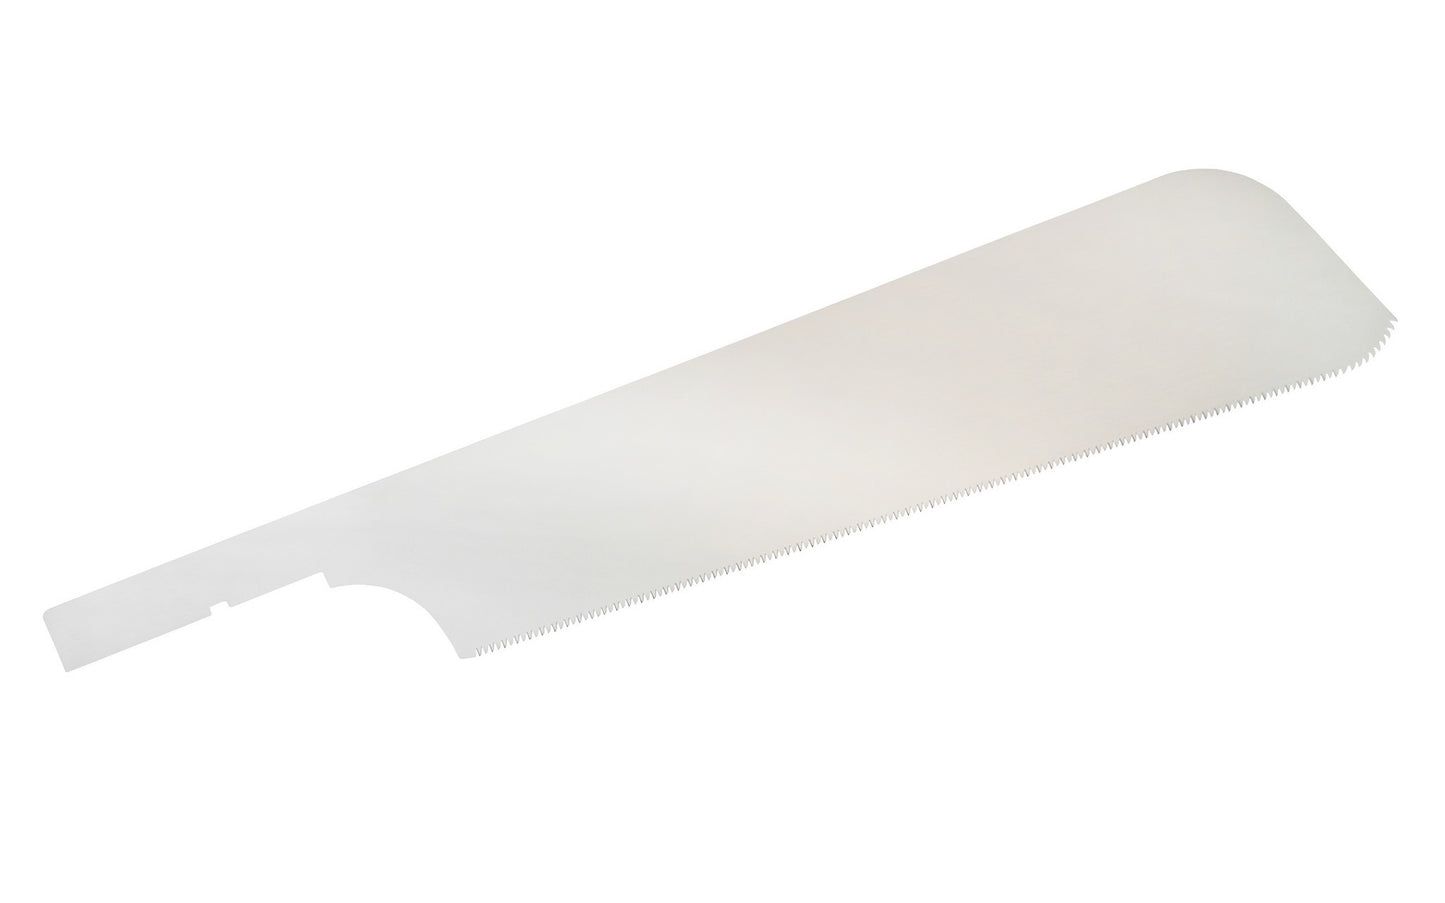 Replacement Blade for Japanese Gyokucho Razorsaw 240 mm